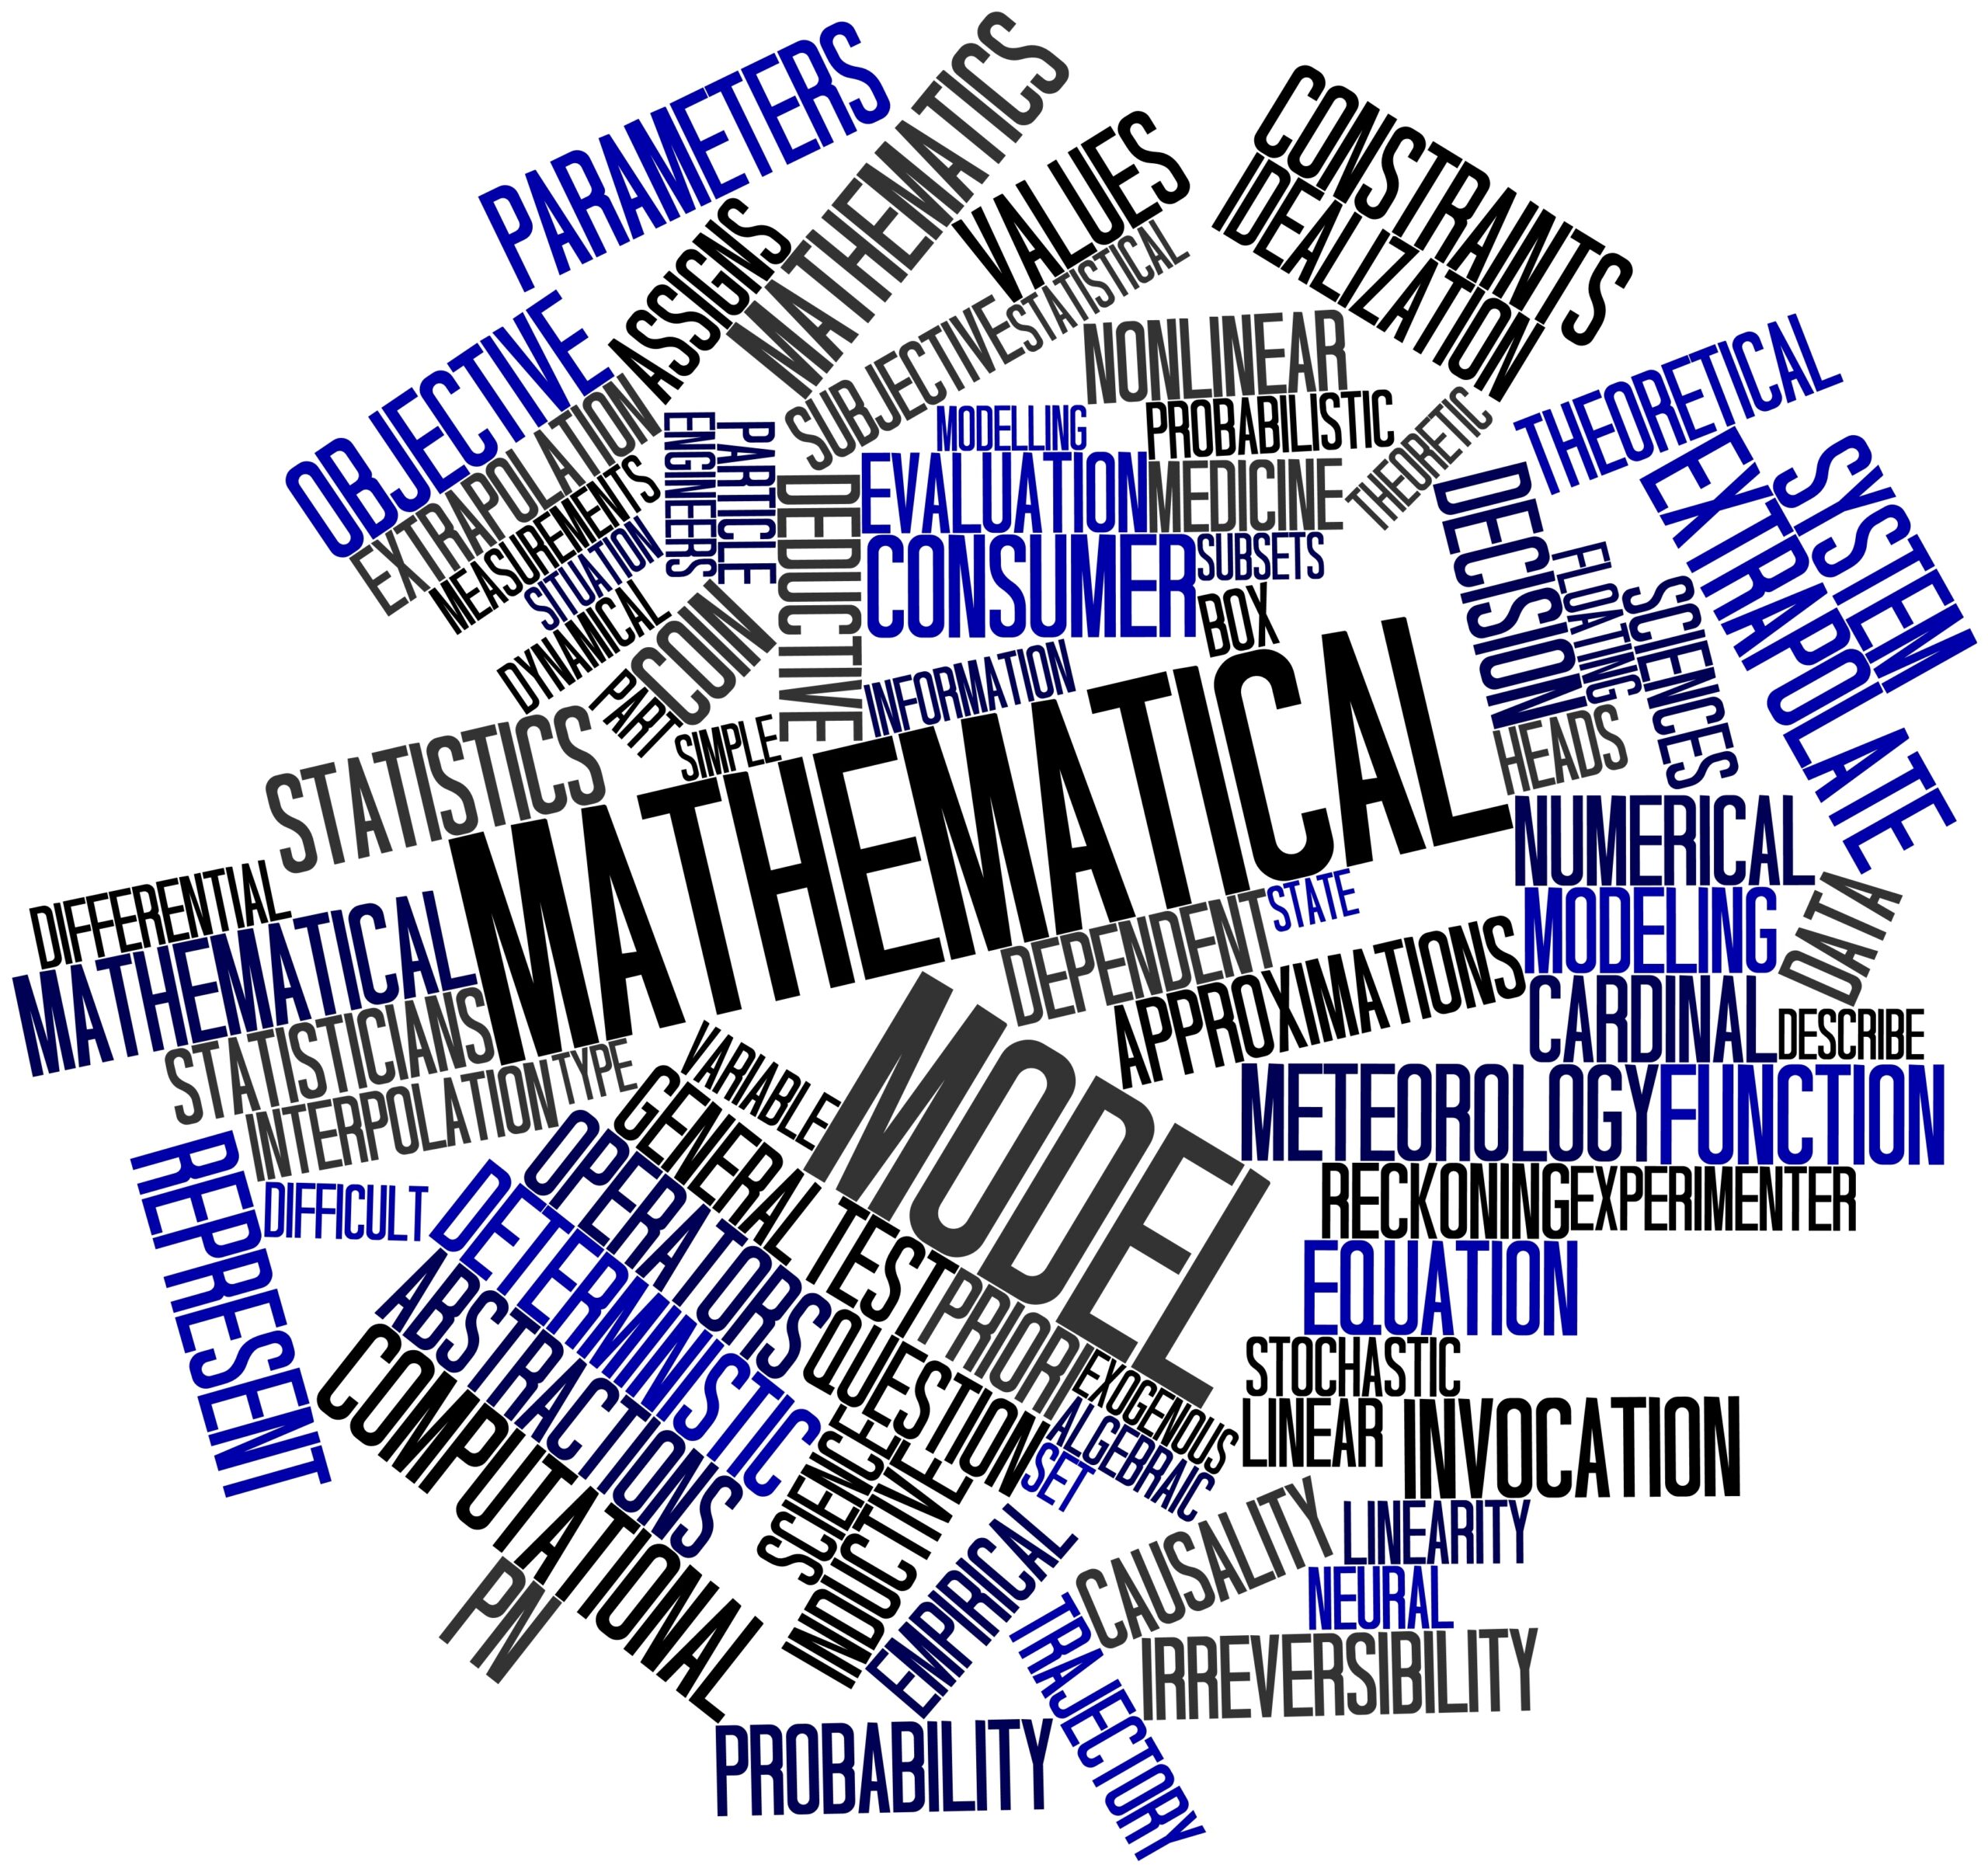 Mathematical-Model-and-other-key-optimization-computer-and-maths-phrases-in-jumbled-word-display